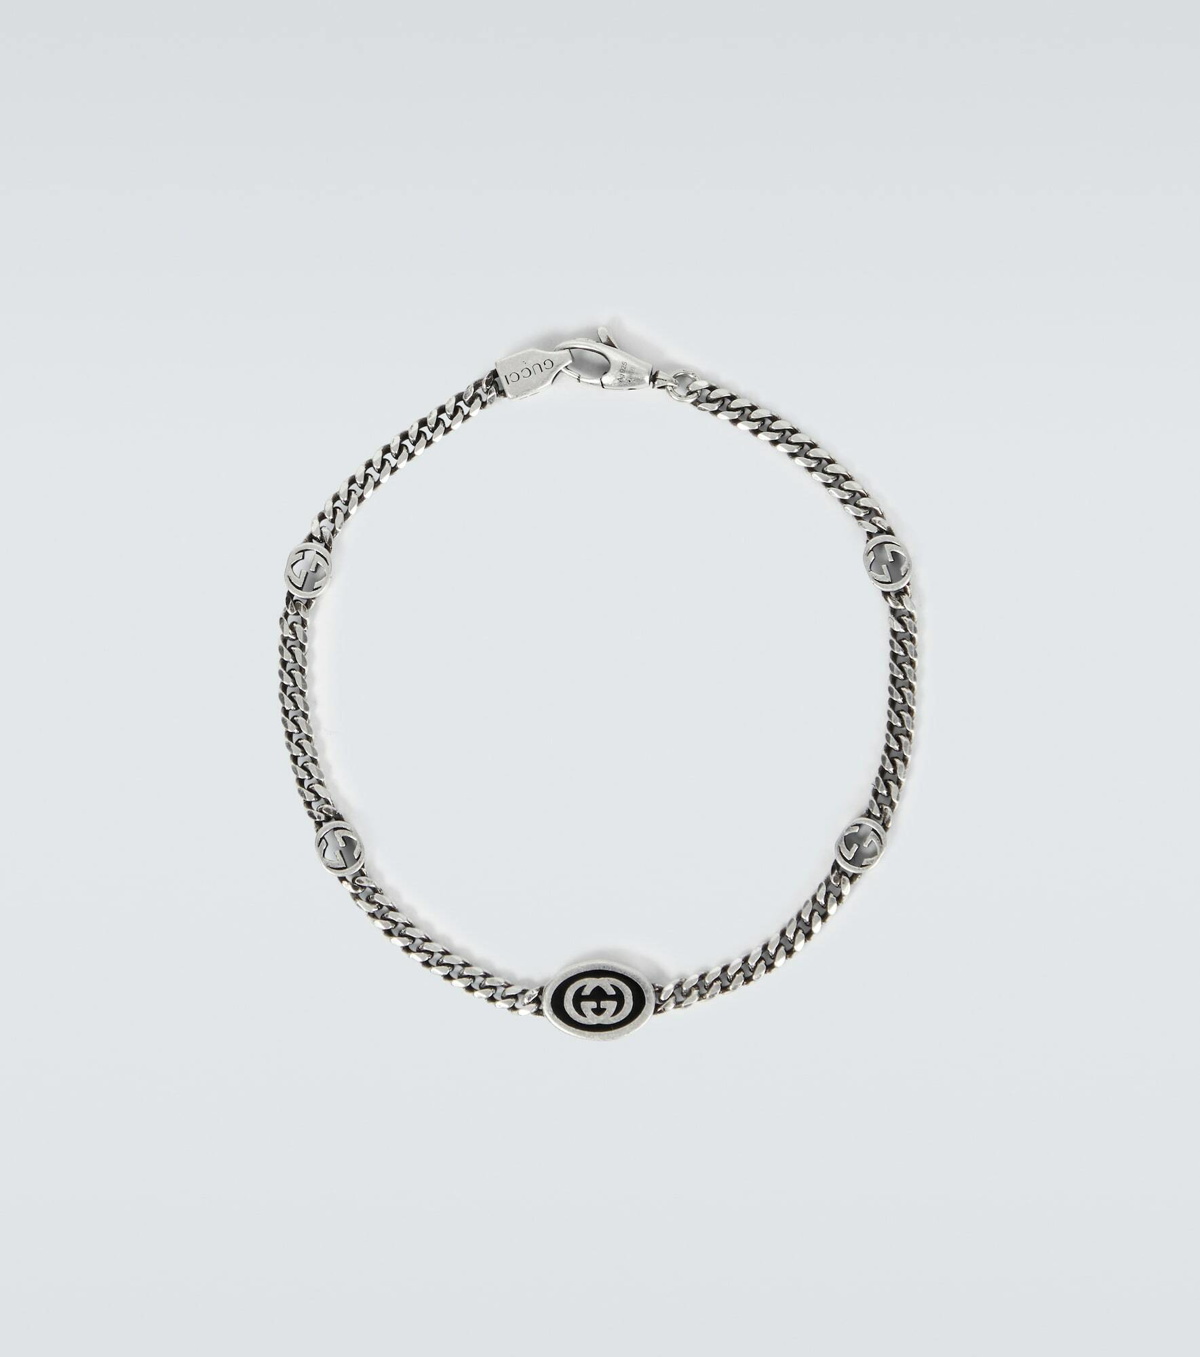 Gucci - Men - Guccighost Engraved Sterling Silver ID Bracelet Silver - 18